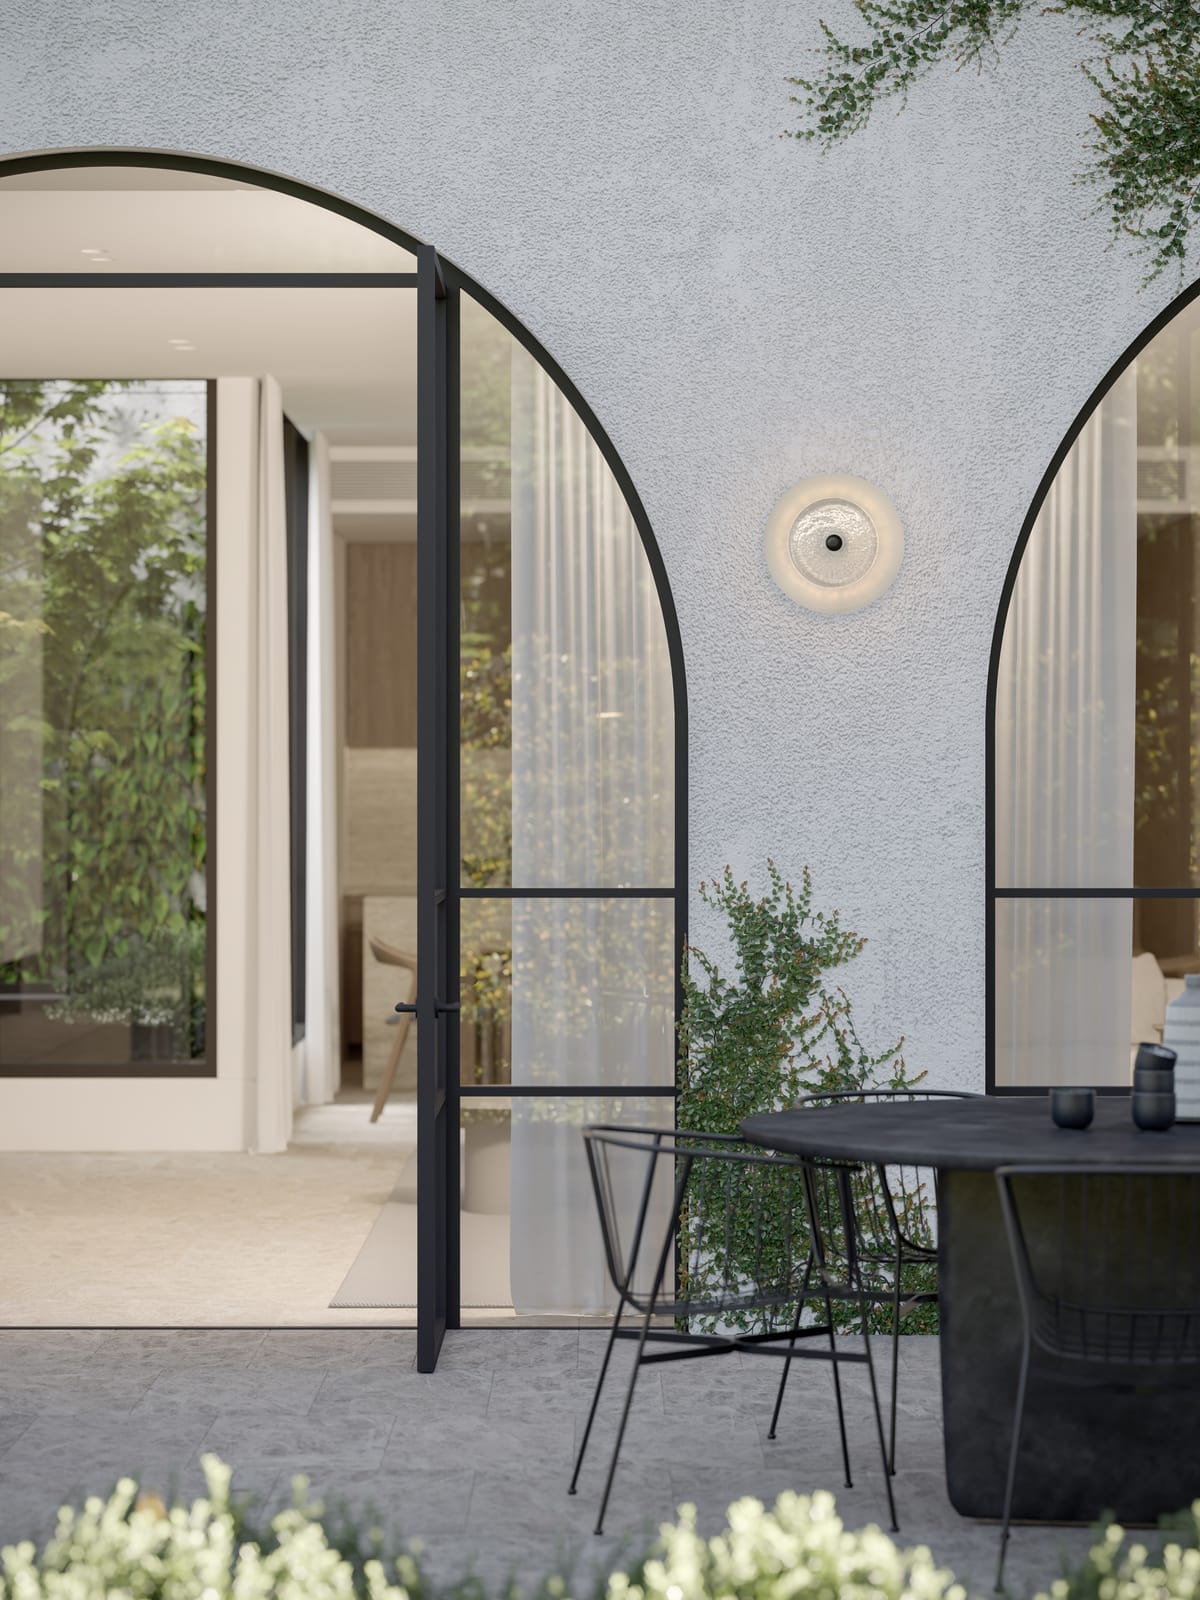 Coral Dome Wall Light by SOKTAS showing the light in an exterior courtyard on a white rendered wall